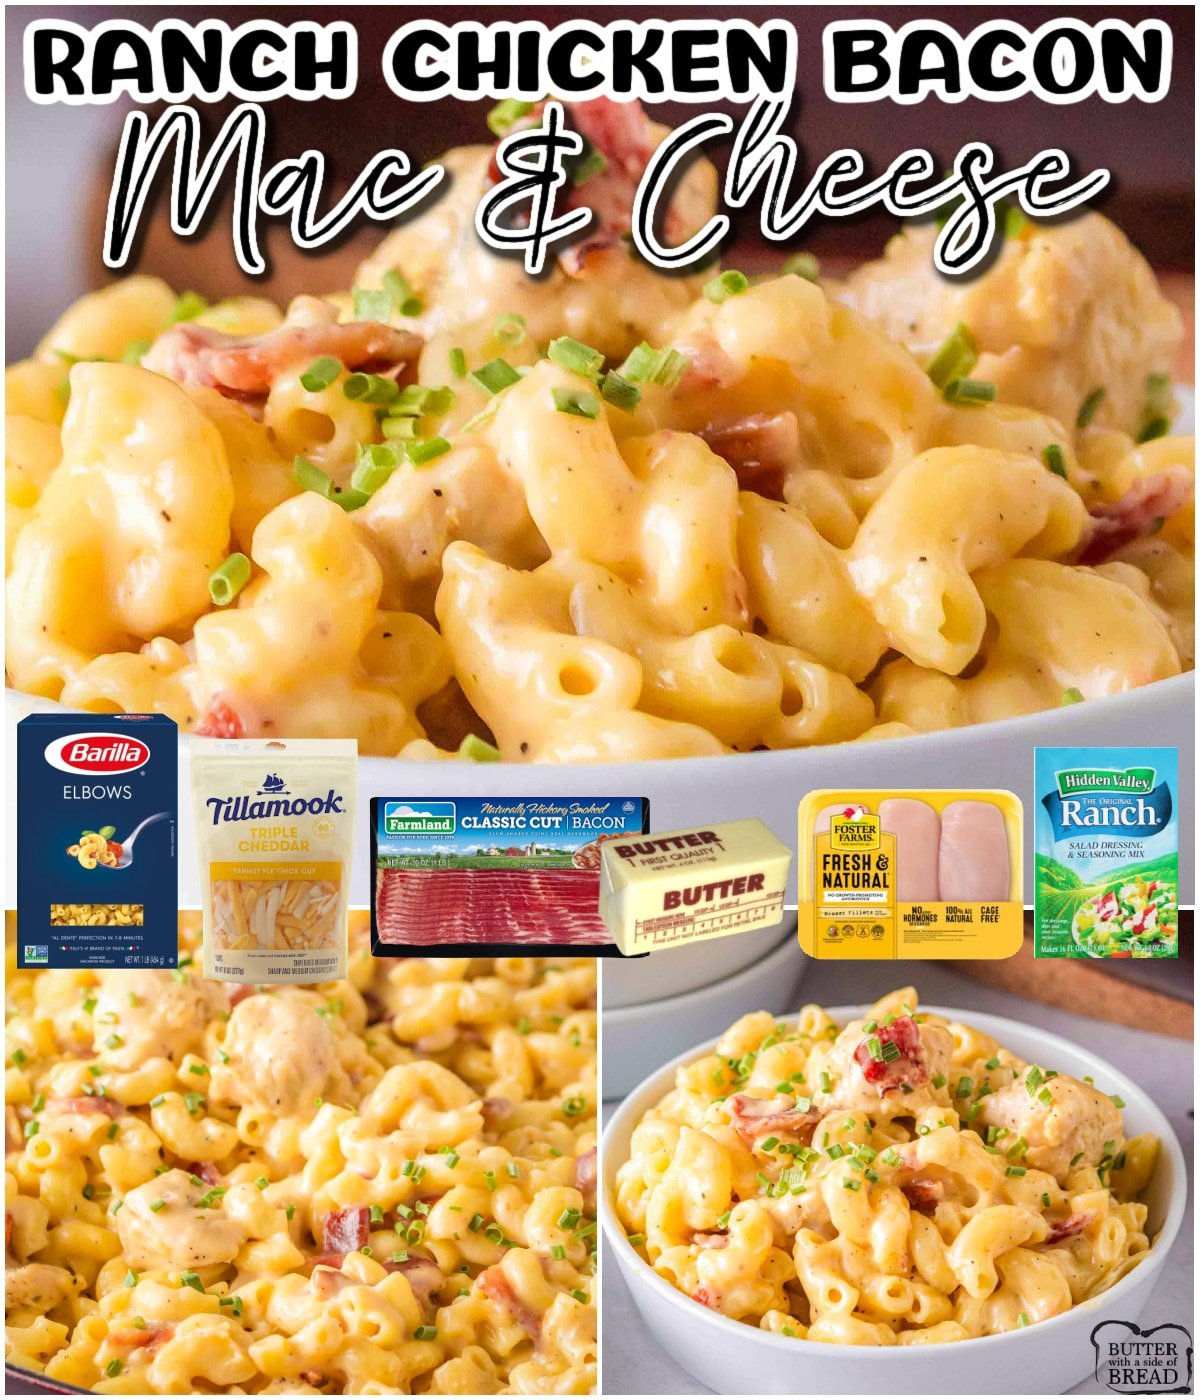 Ranch Chicken Bacon Mac & Cheese is a delicious, hearty pasta dish with fantastic flavors! Cheesy macaroni with added chicken & ranch that everyone loves! 